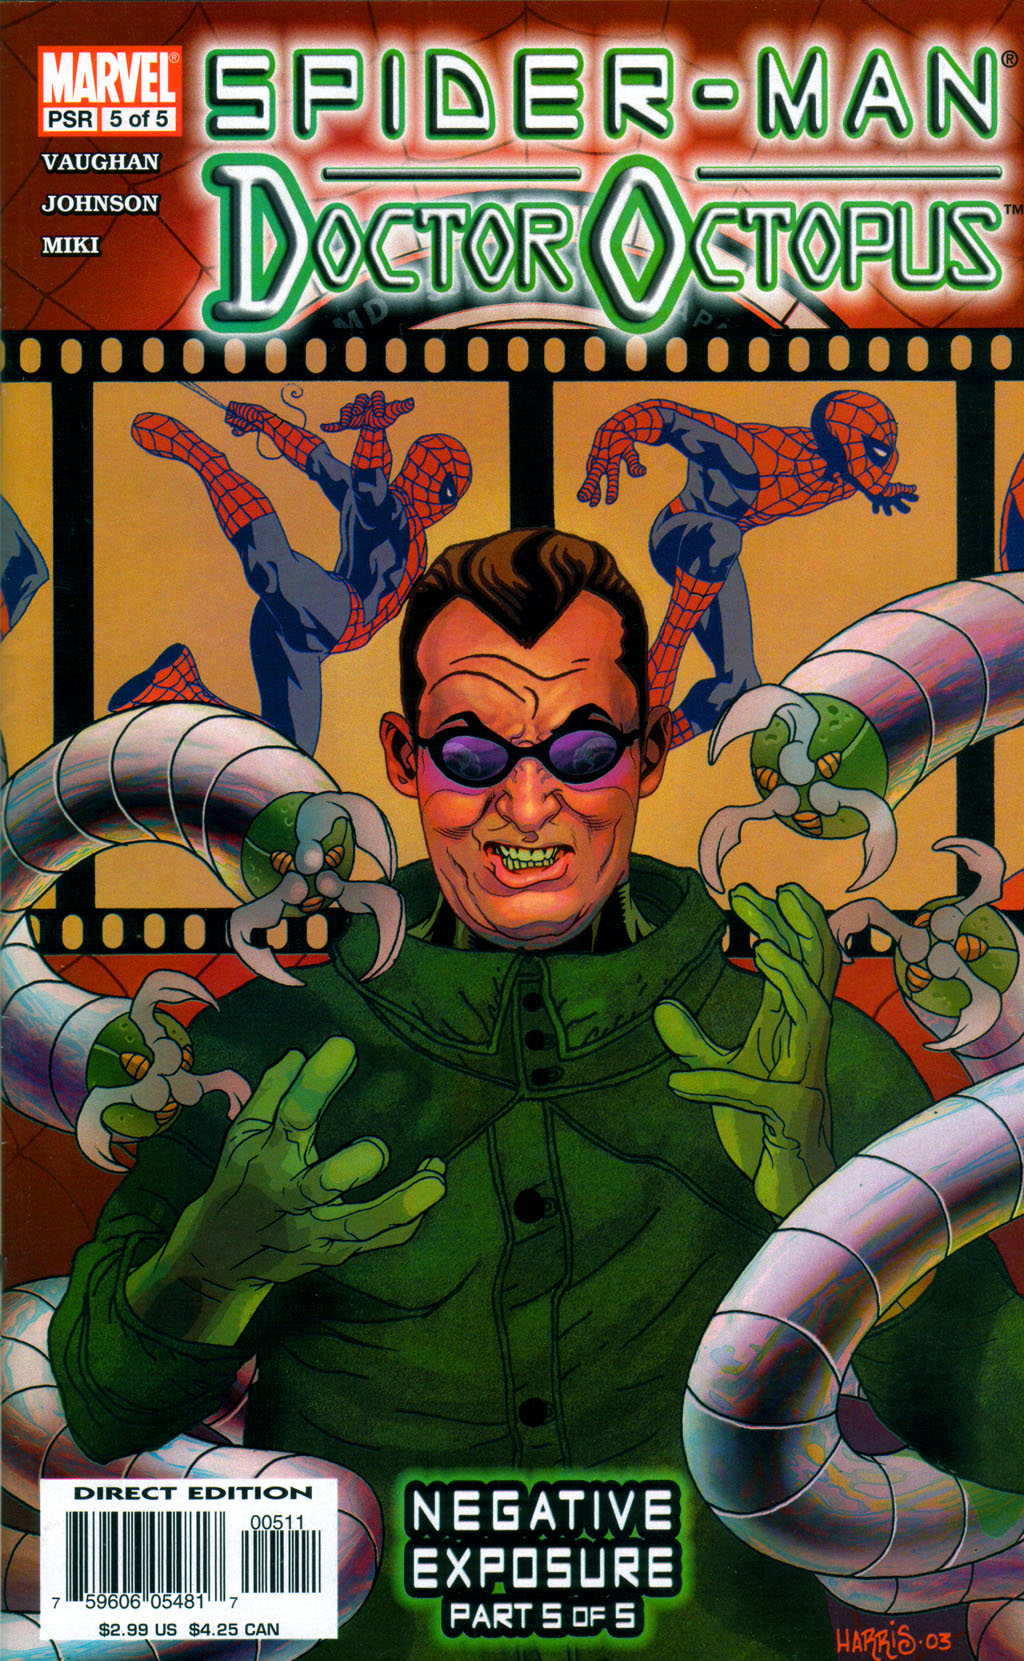 Doctor Octopus Negative Exposure Issue 5 | Read Doctor Octopus Negative  Exposure Issue 5 comic online in high quality. Read Full Comic online for  free - Read comics online in high quality .